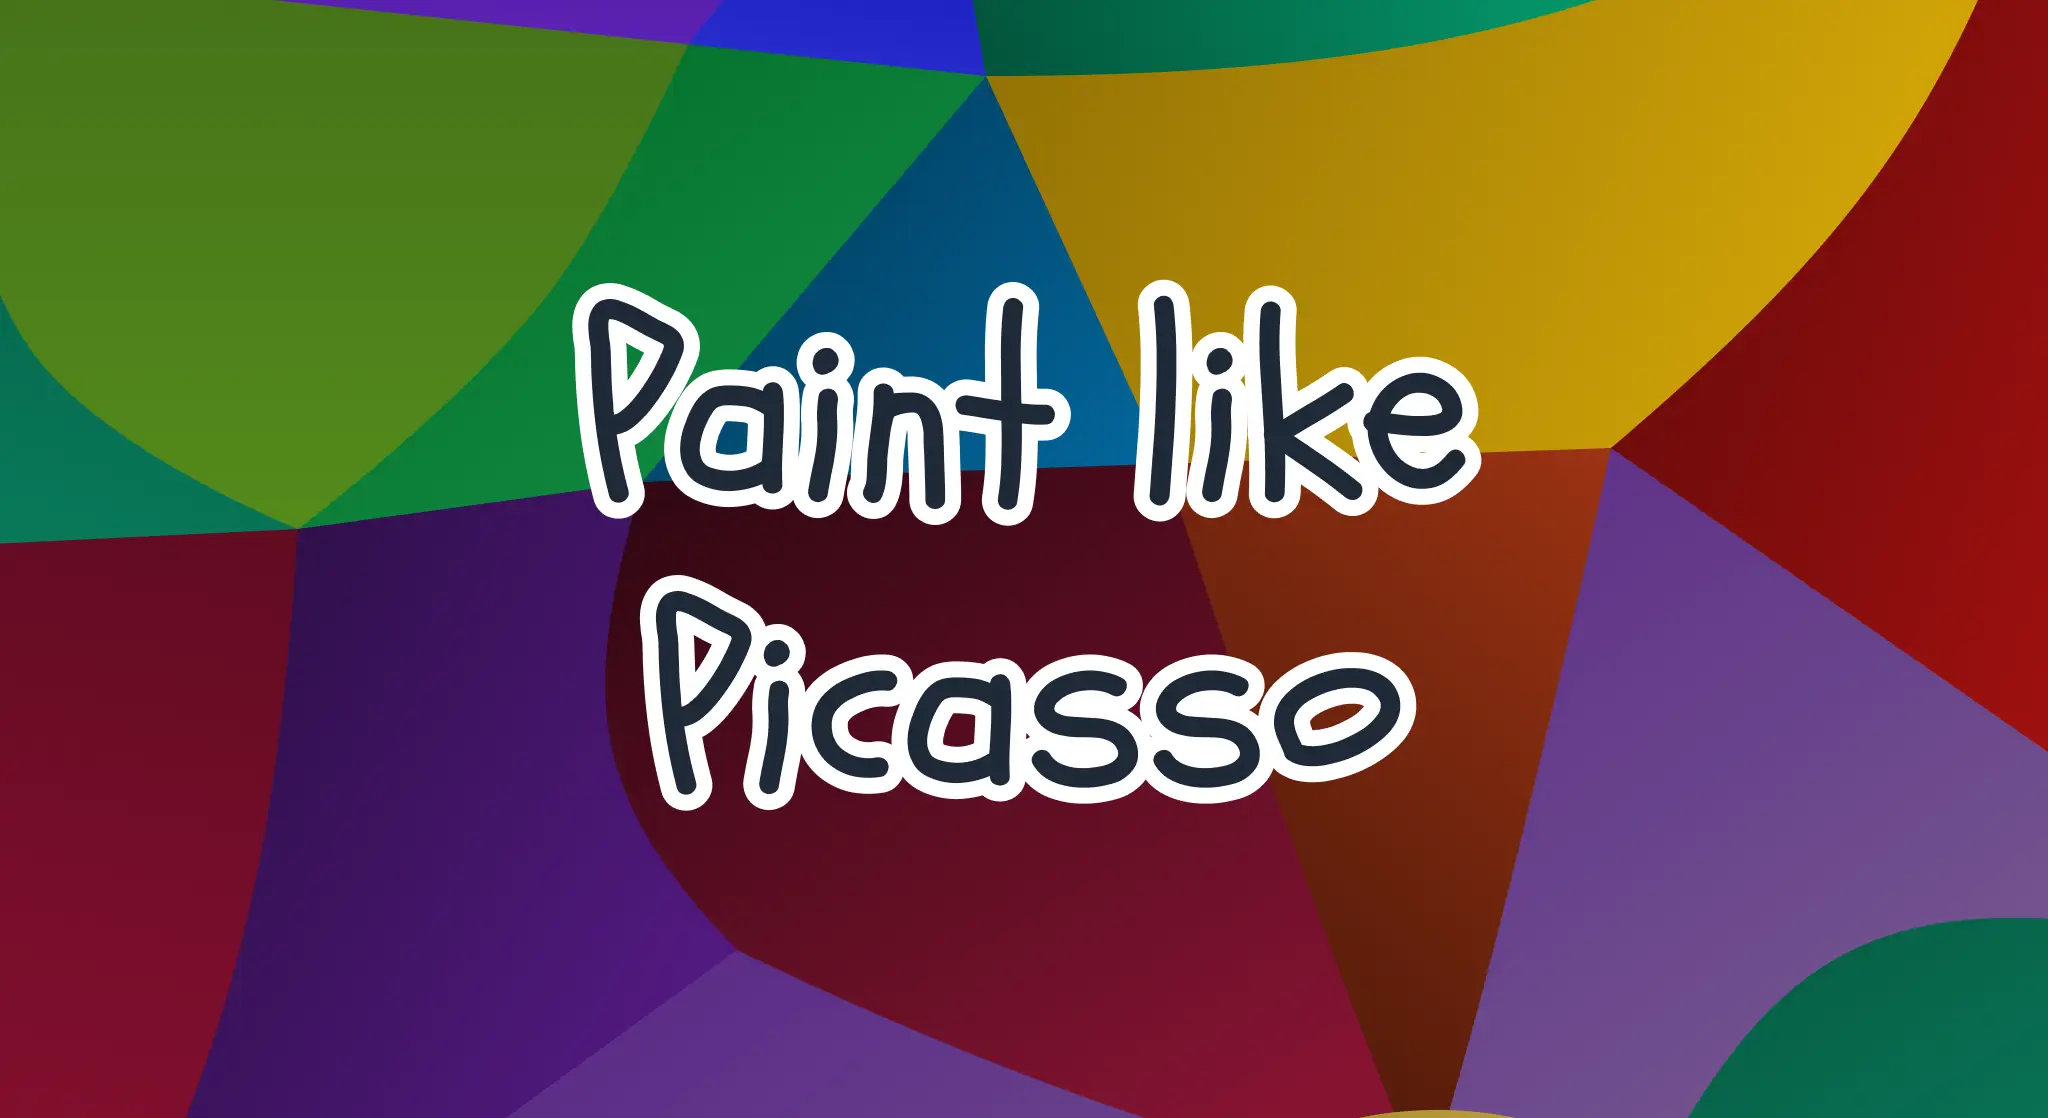 Everyone can create their own Picasso art with this activity.